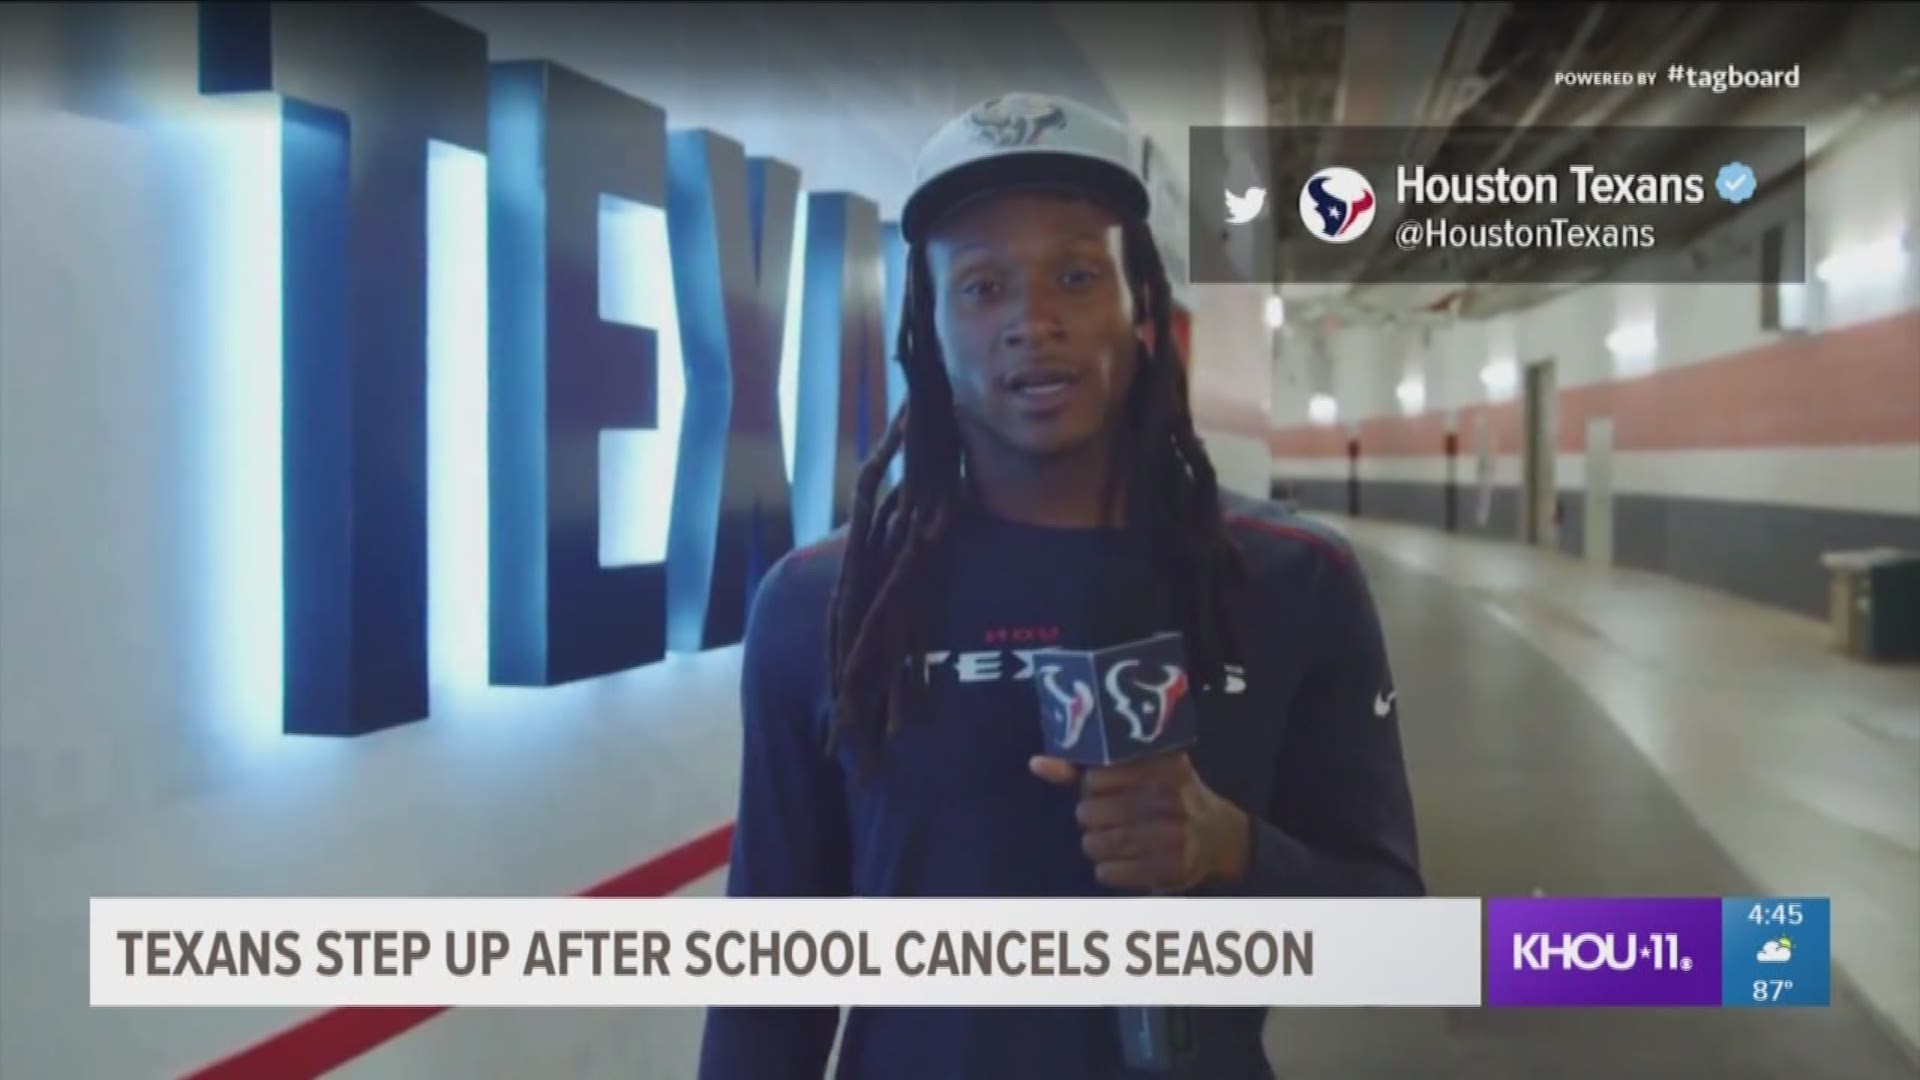 They may have lost their last season of high school football but the seniors on the Sabine Pass High School football team are getting a weekend ticket to the NFL courtesy of the Houston Texans.